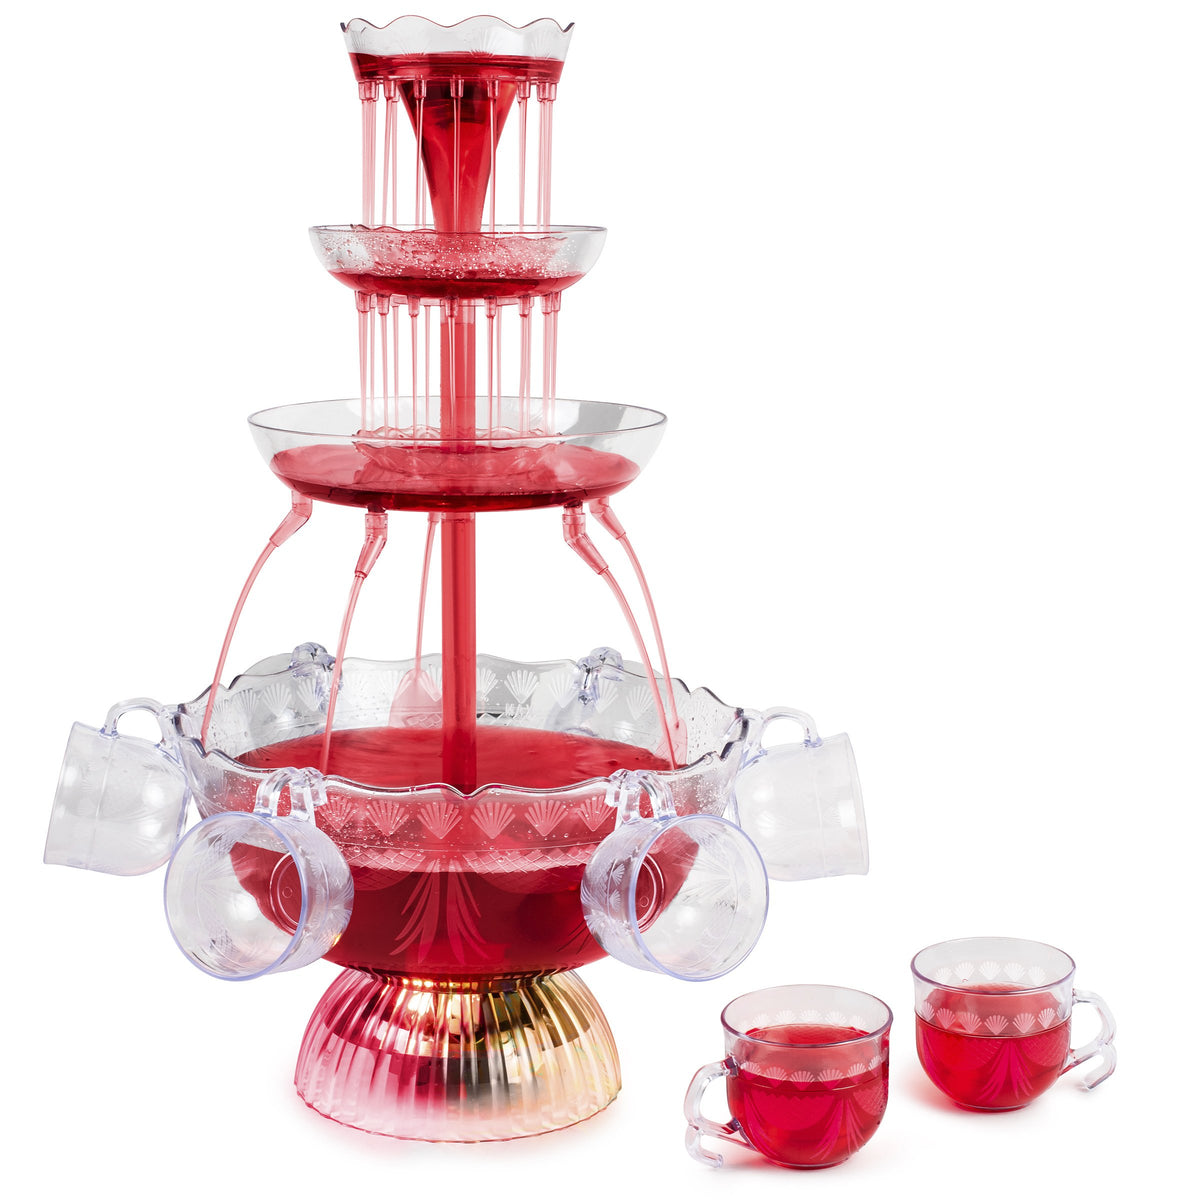 TMXKOOK Vintage Collection 3-Tier Champagne Fountain Illuminate Your Party  - Includes LED Lighted Base, 1.5 Gallon Capacity, and 5 Reusable Cups